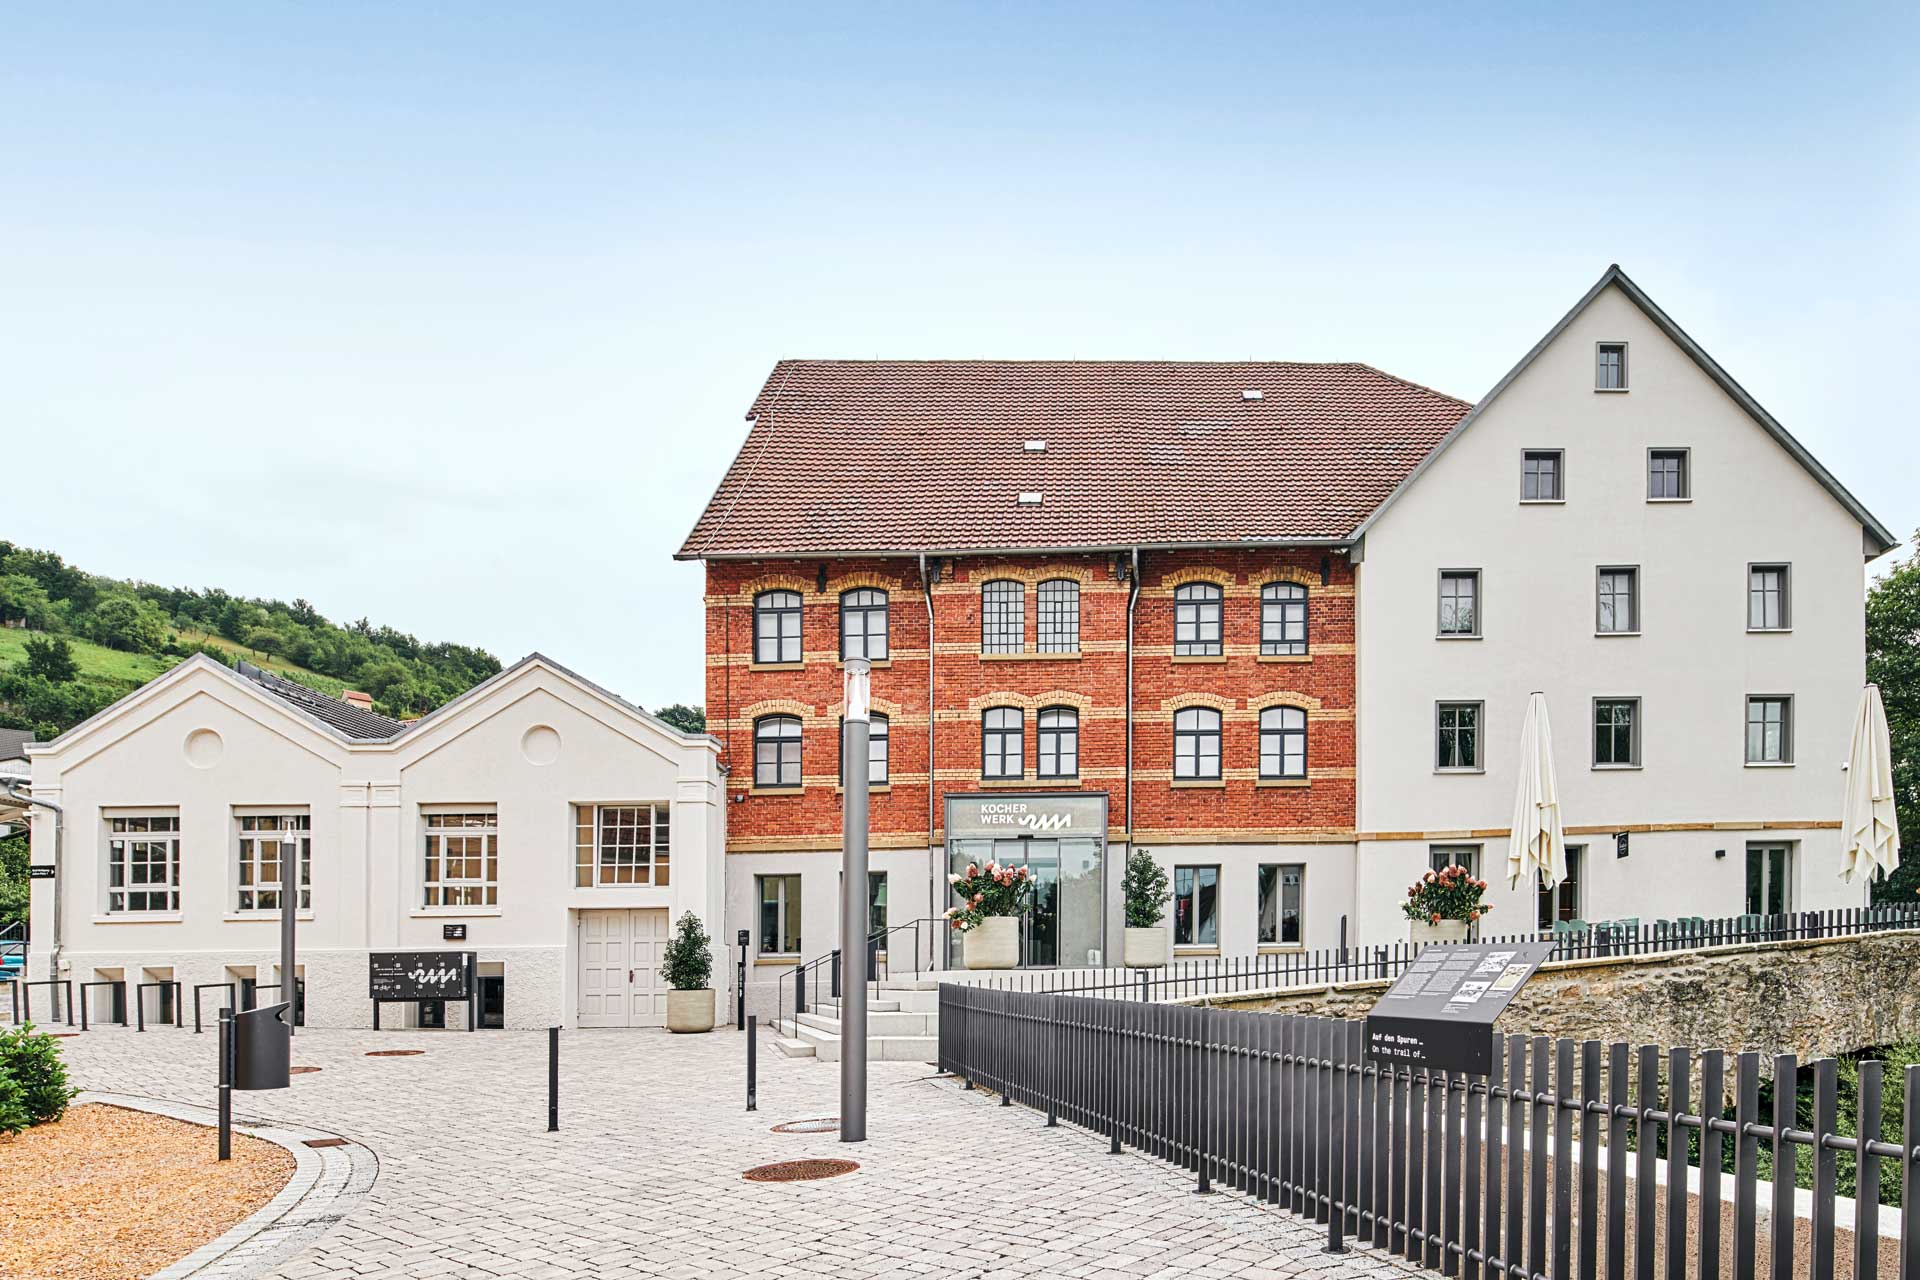 KOCHERWERK  Technology, history, and regional flair for all generations: The newly opened museum project tells the story of the fastening industry in the Hohenlohe district.